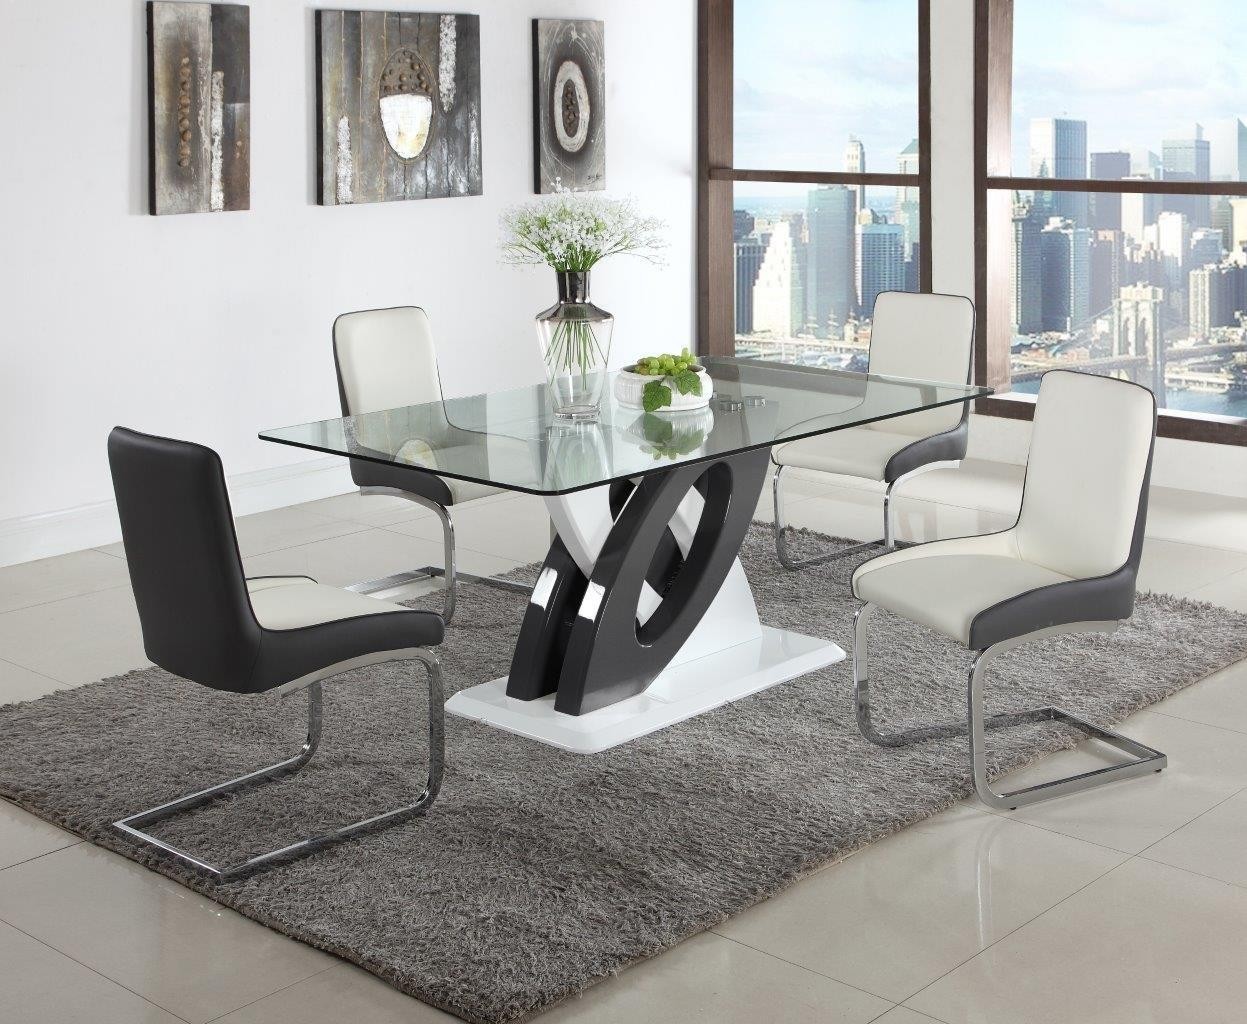 Modern Dining Room Table With Chairs